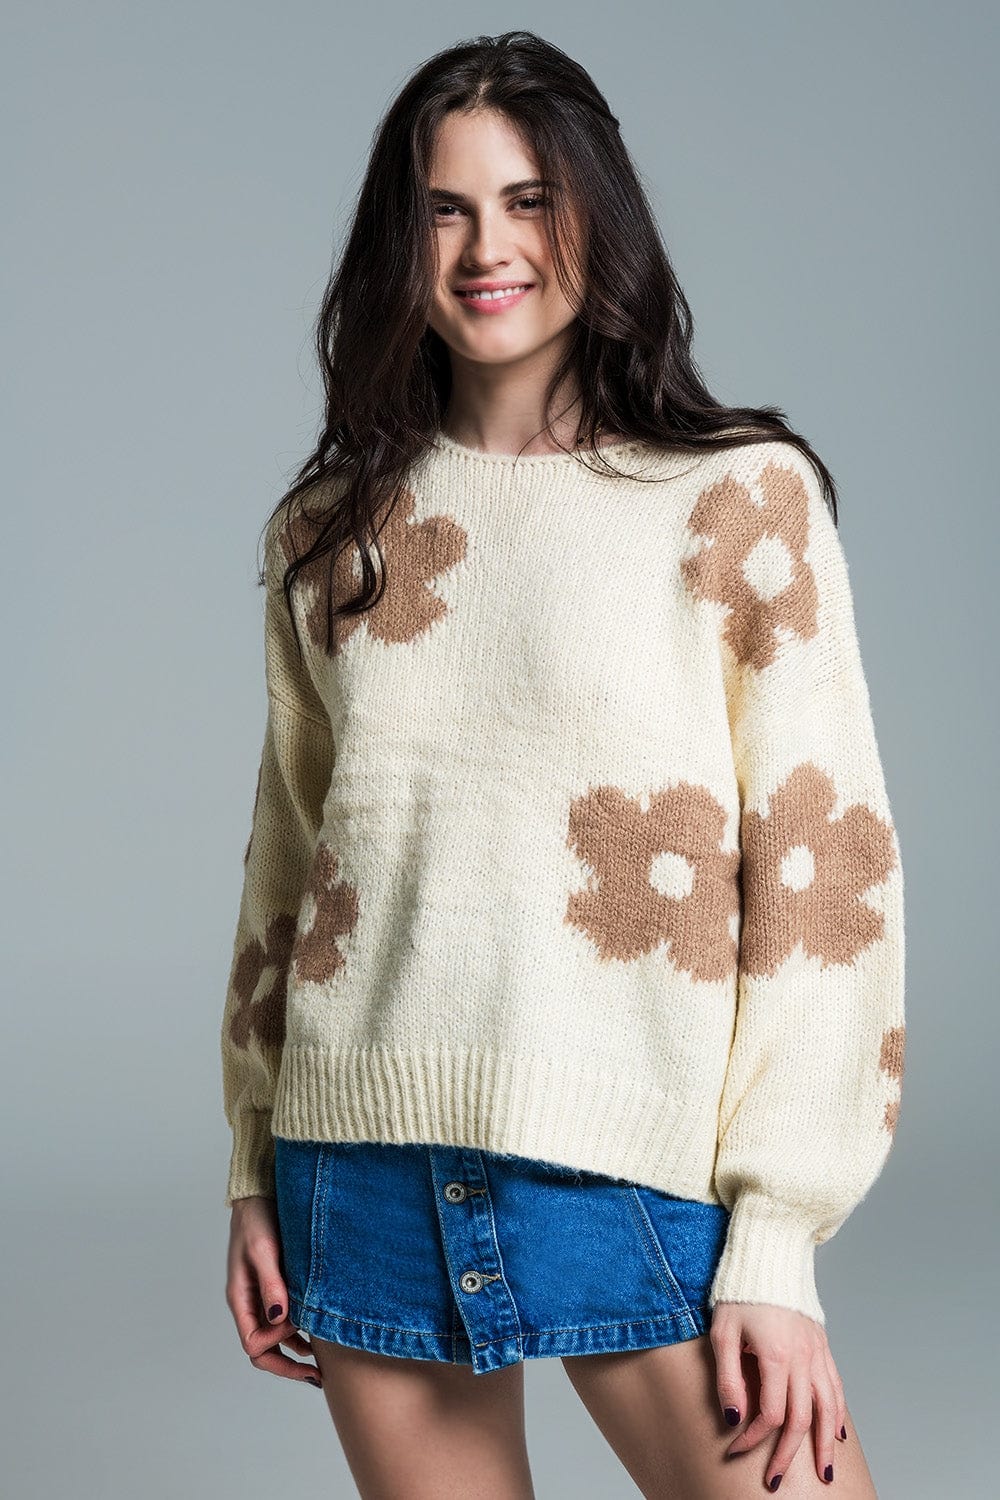 Q2 Women's Sweater One Size / Beige Oversized Balloon Sleeve Cream Sweater With Light Brown Flowers